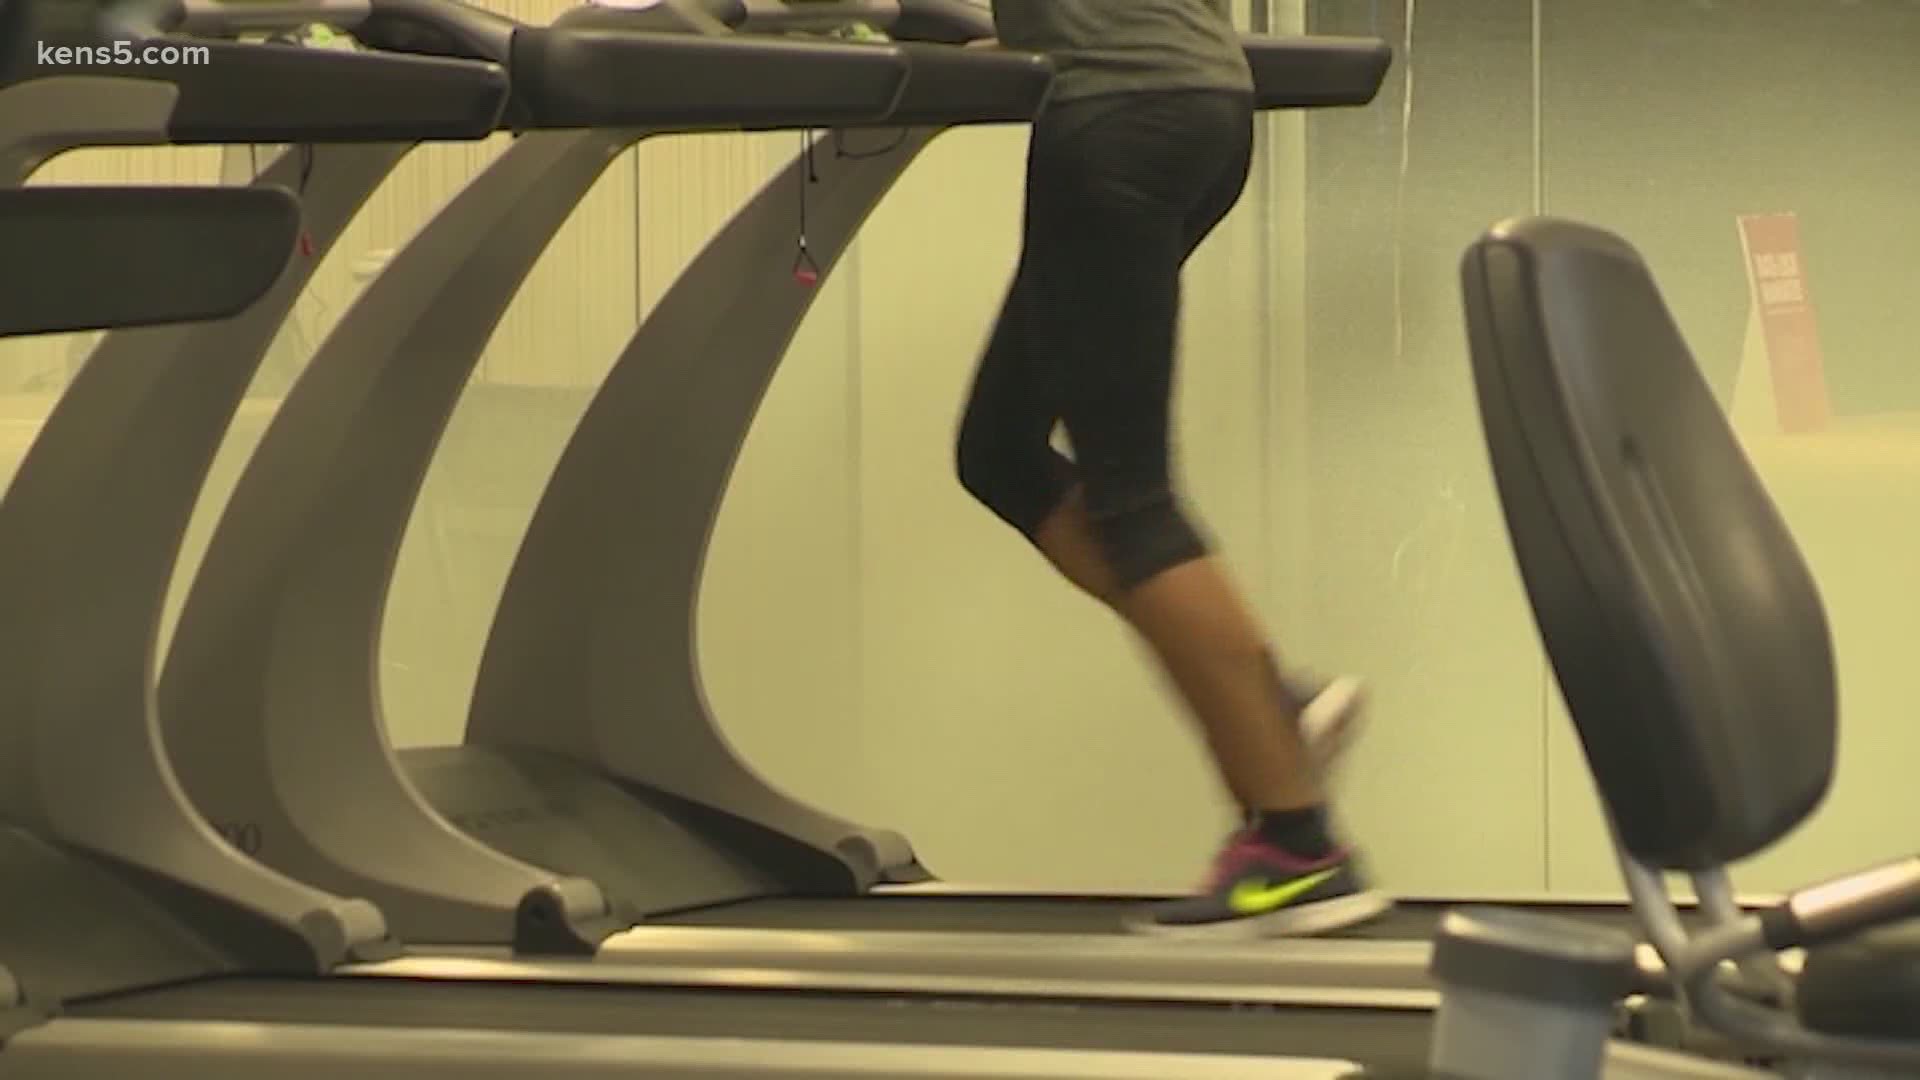 Here's how you can get out of your gym membership amid COVID-19 | kens5.com